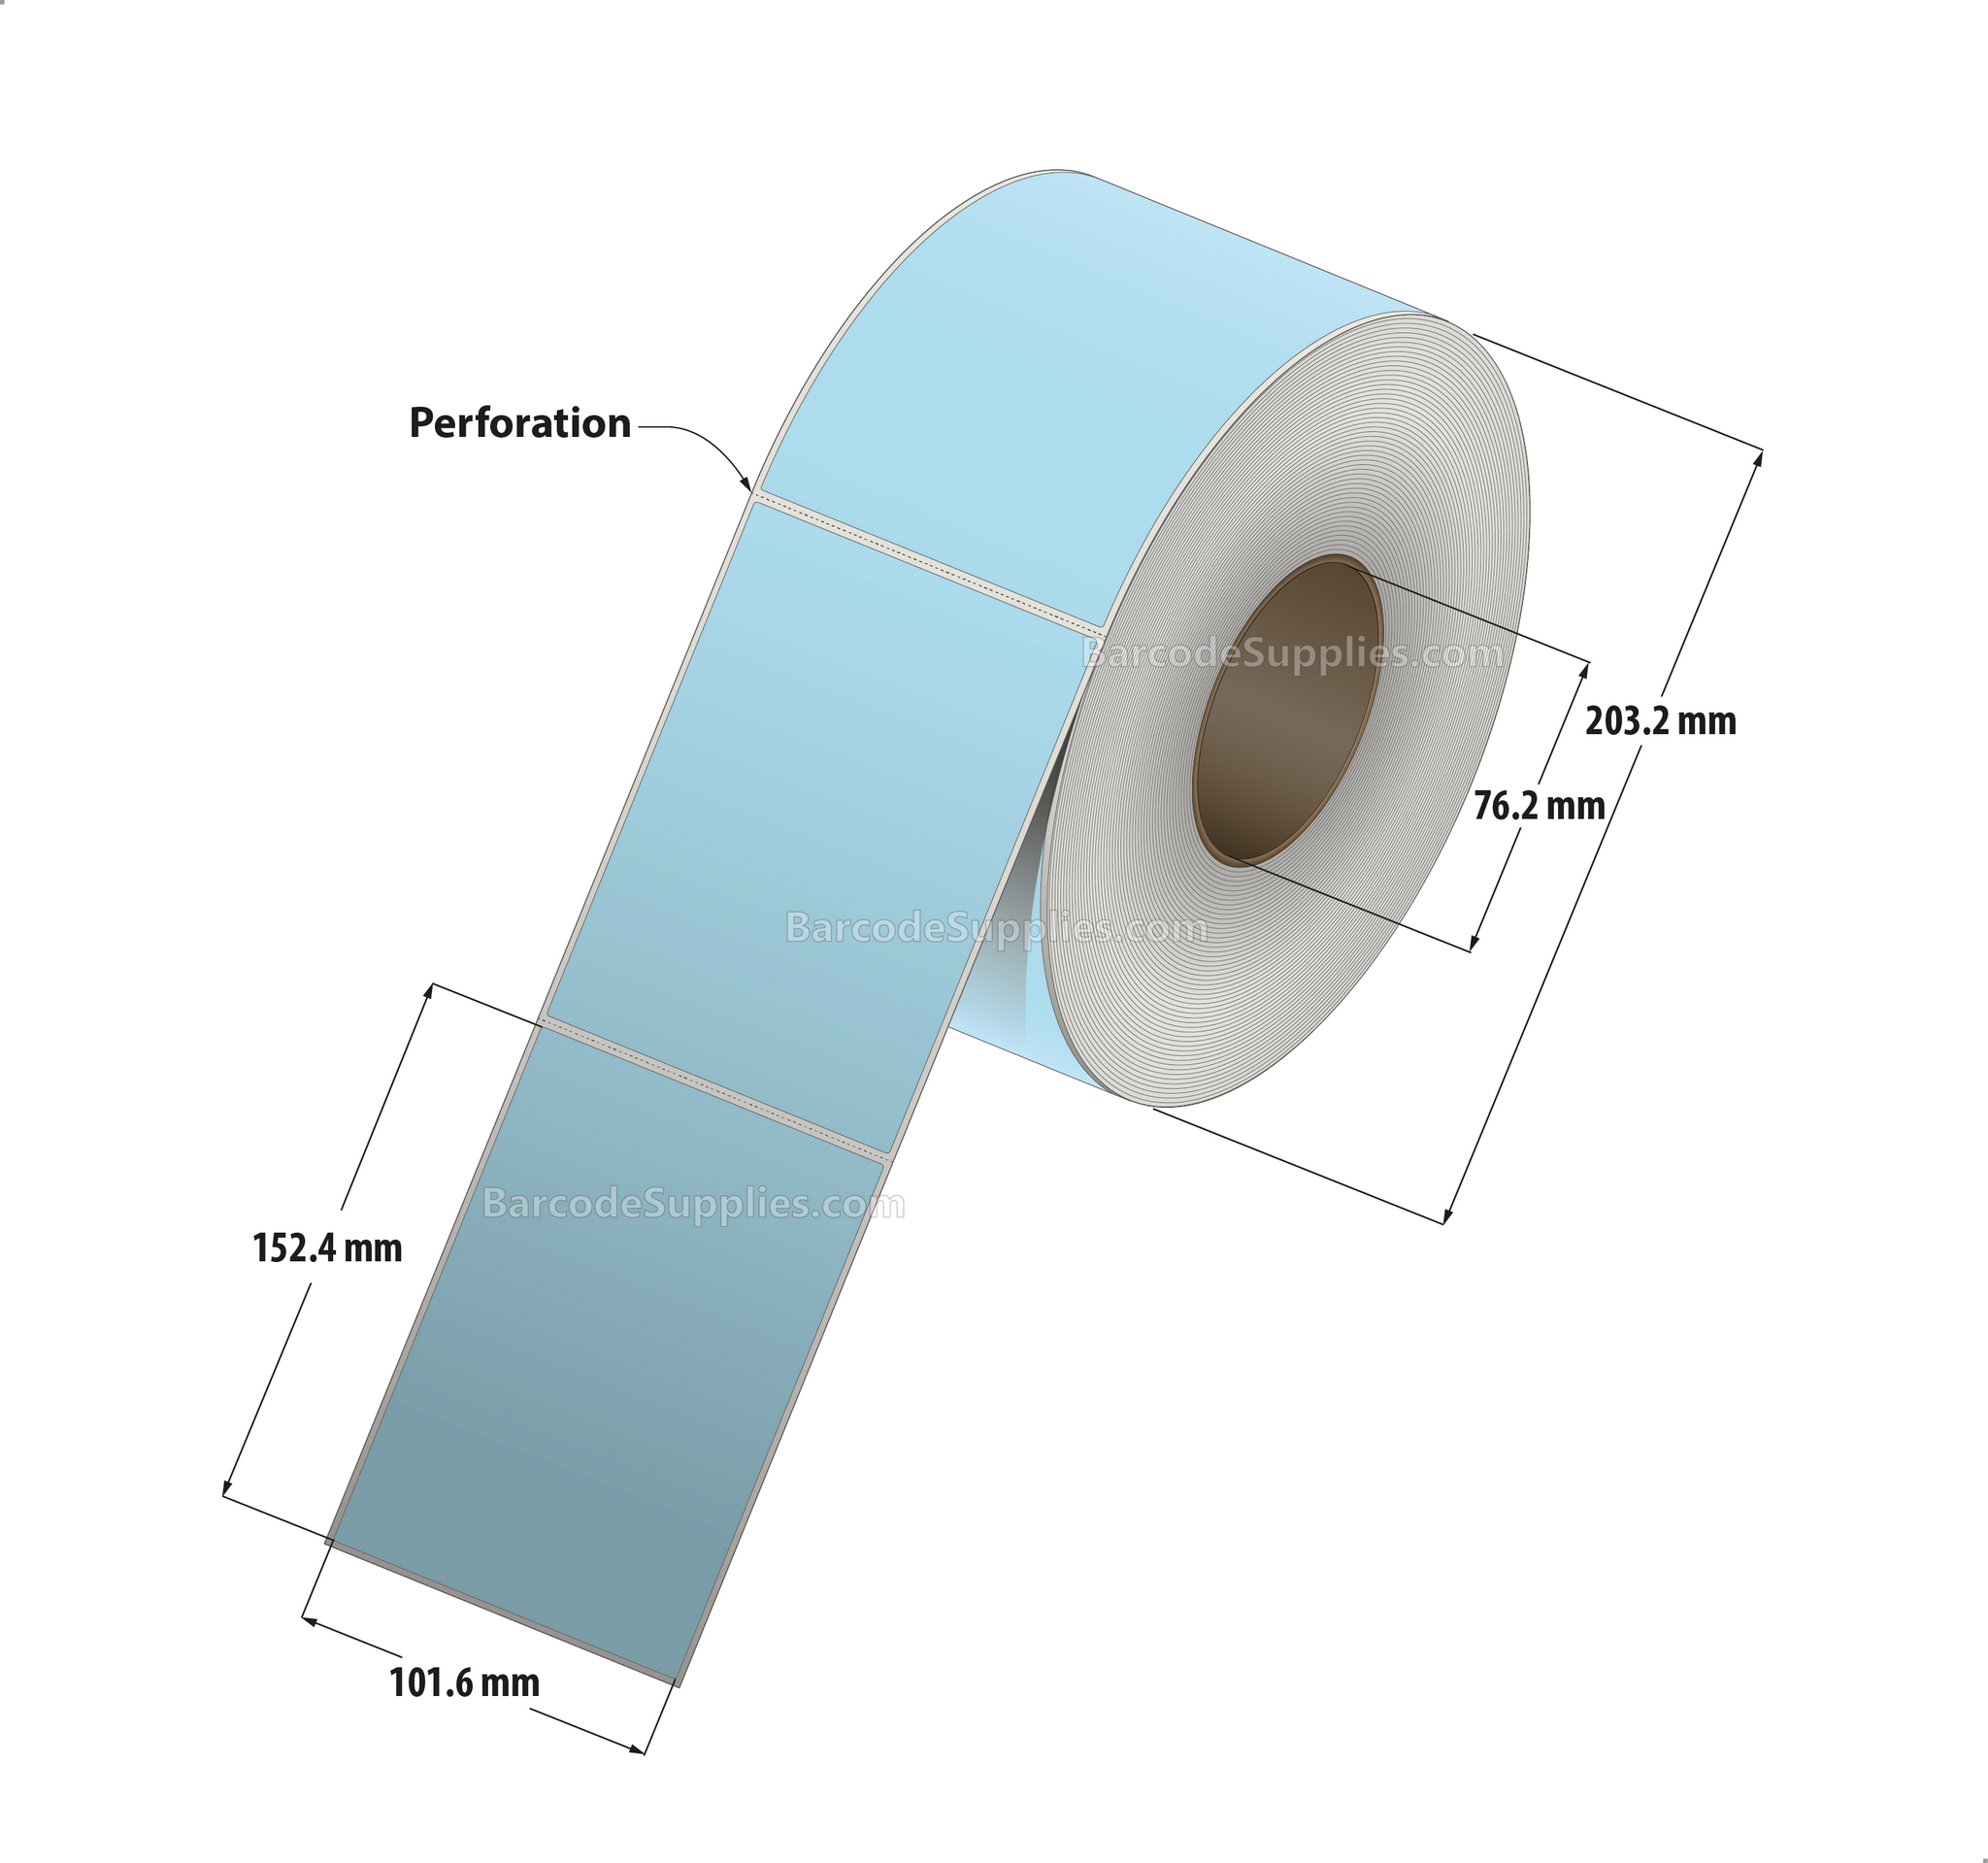 4 x 6 Thermal Transfer 2975 Blue Labels With Permanent Acrylic Adhesive - Perforated - 1000 Labels Per Roll - Carton Of 4 Rolls - 4000 Labels Total - MPN: TH46-1PBL